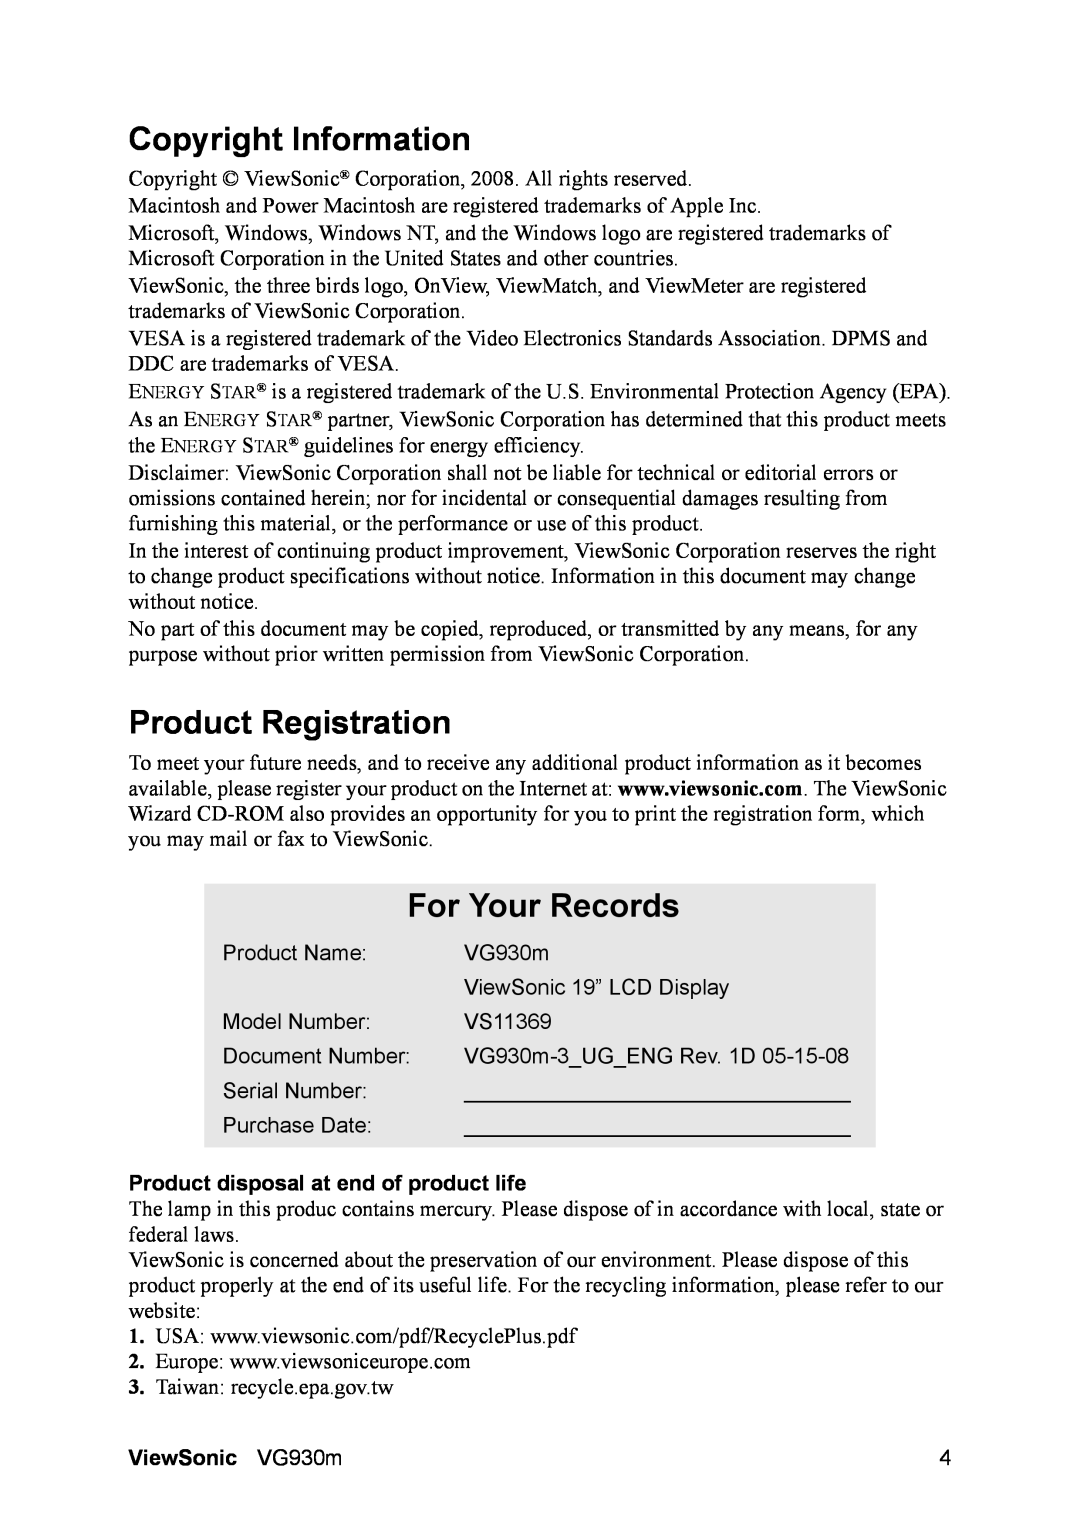 ViewSonic VS11369 Copyright Information, Product Registration, For Your Records, Product disposal at end of product life 